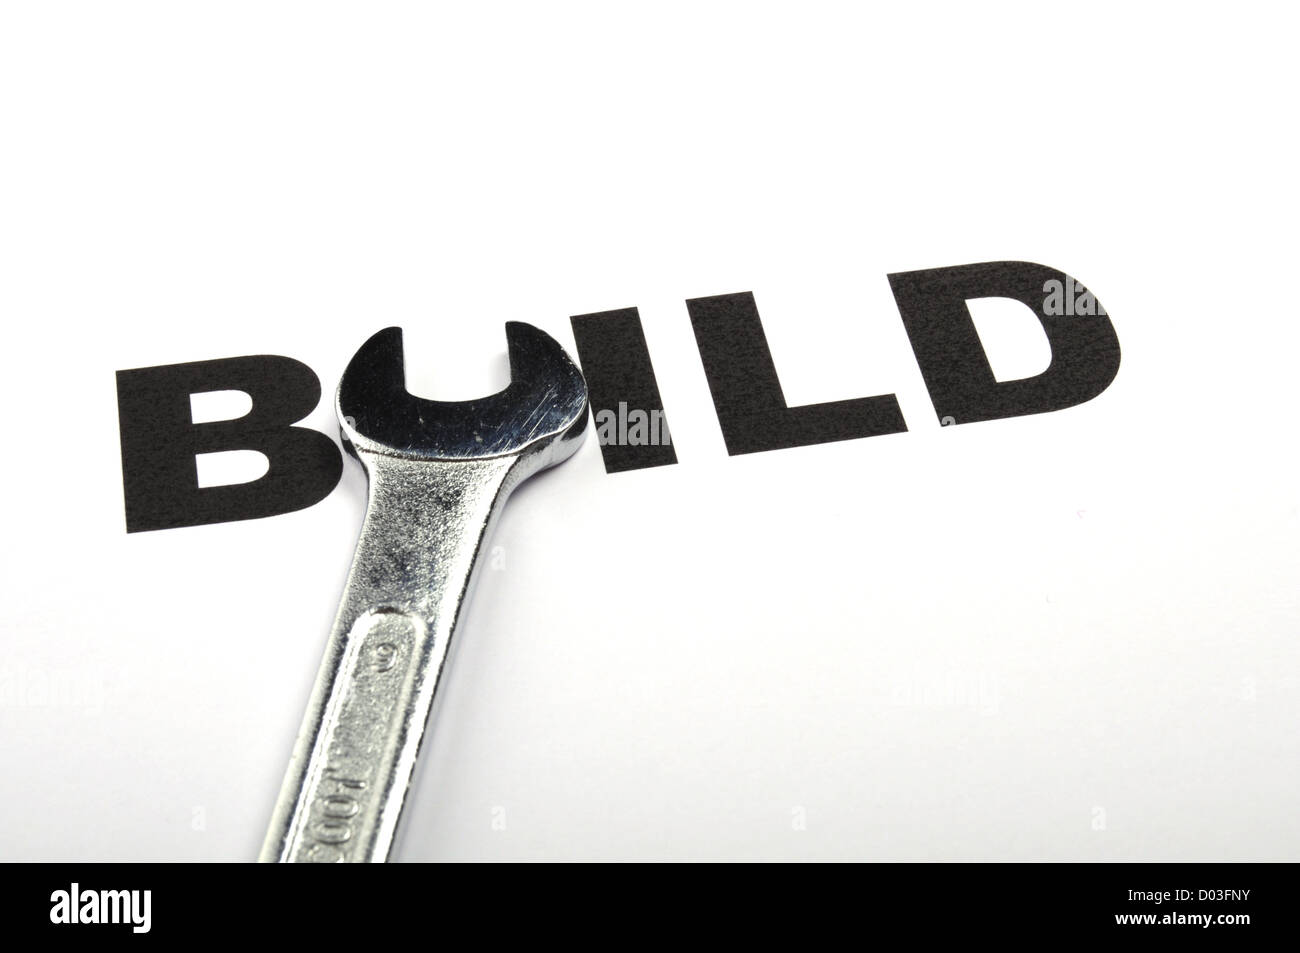 build and  tools showing construction concept with word Stock Photo